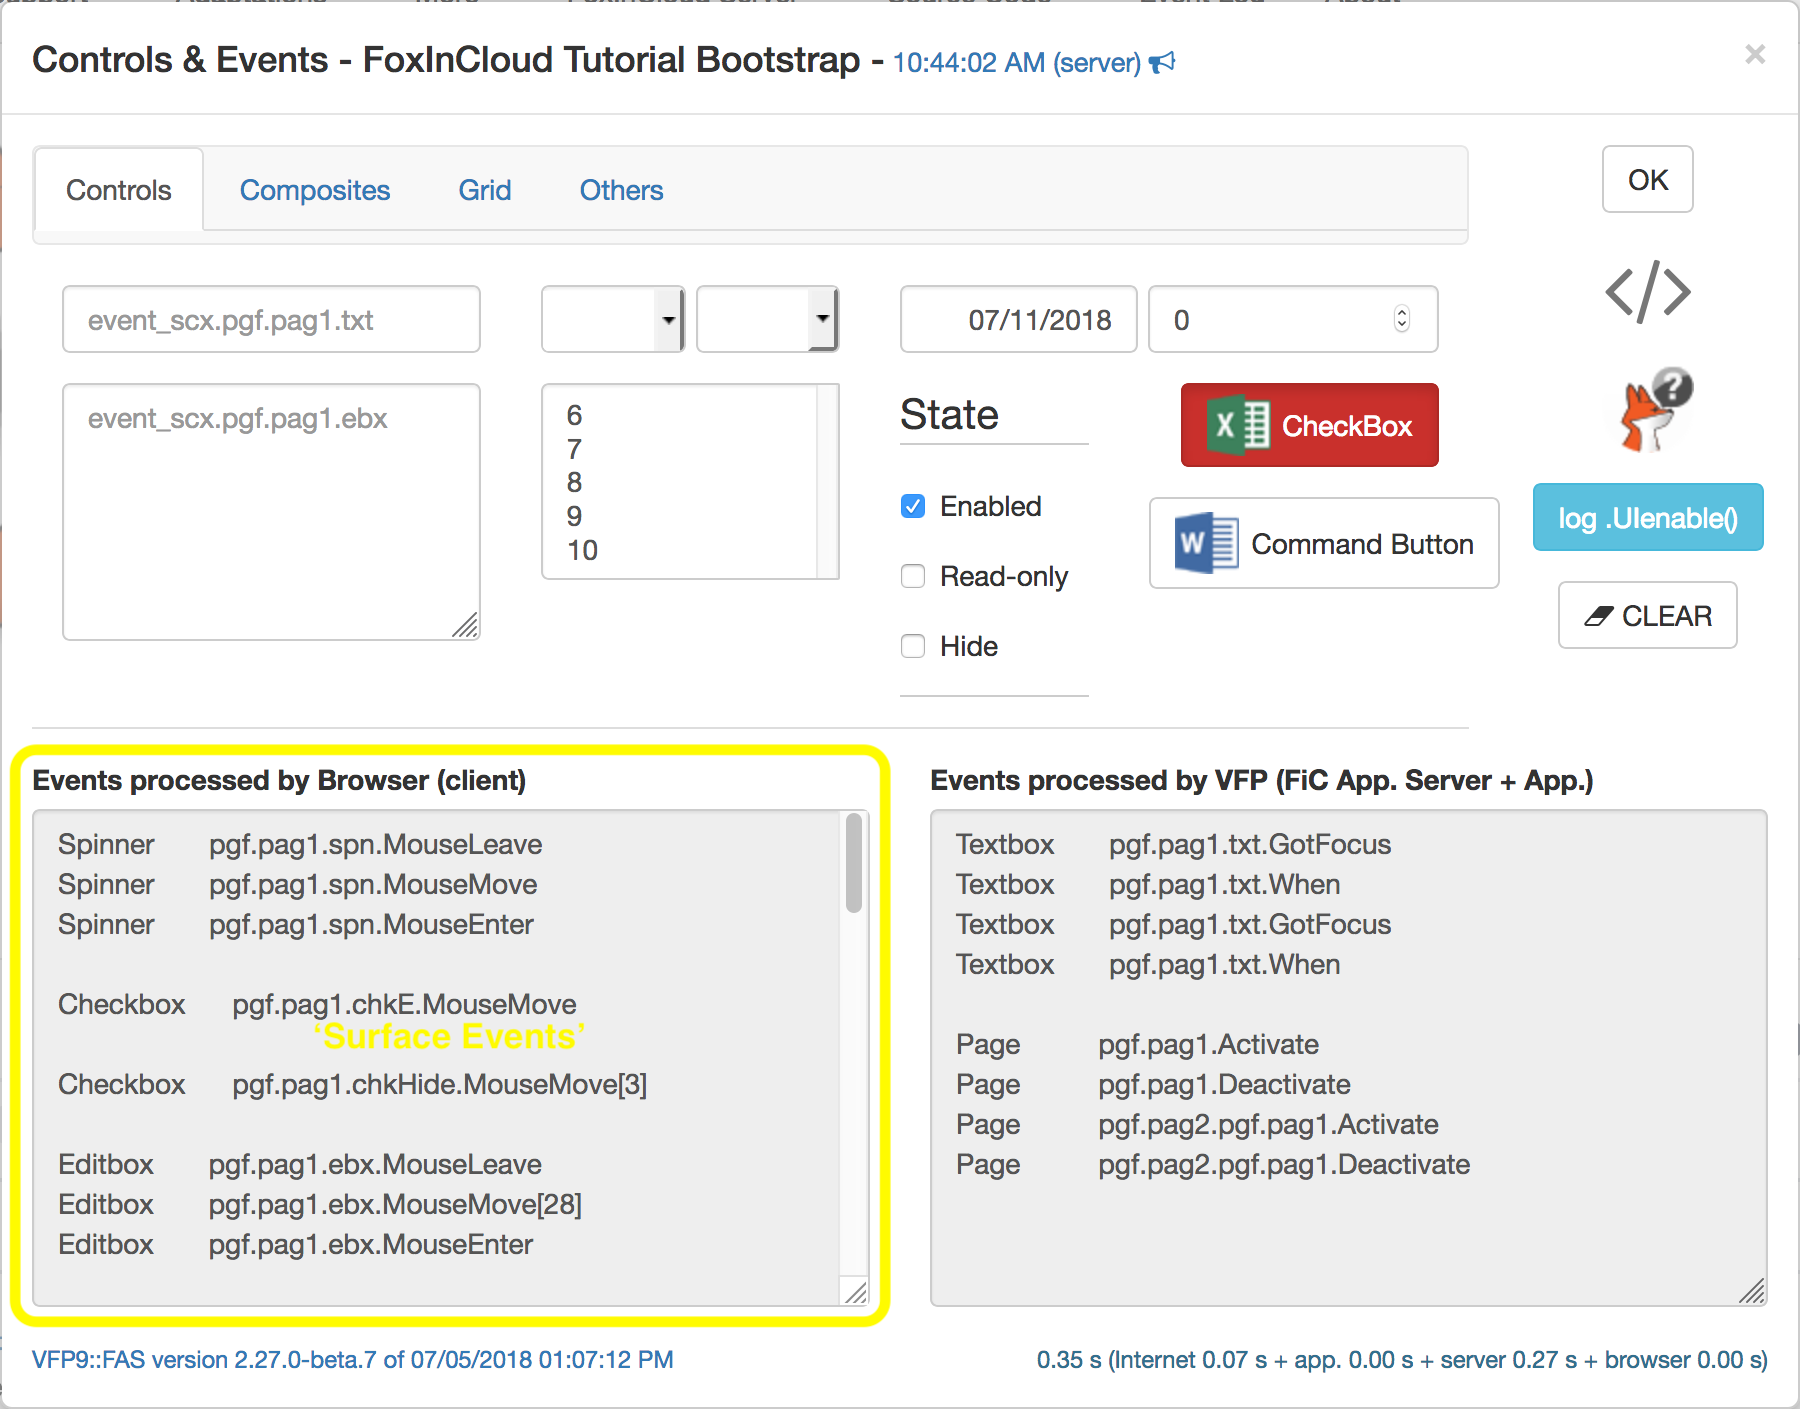 Surface Events In FoxInCloud Live Tutorial's 'Controls and Events' form 